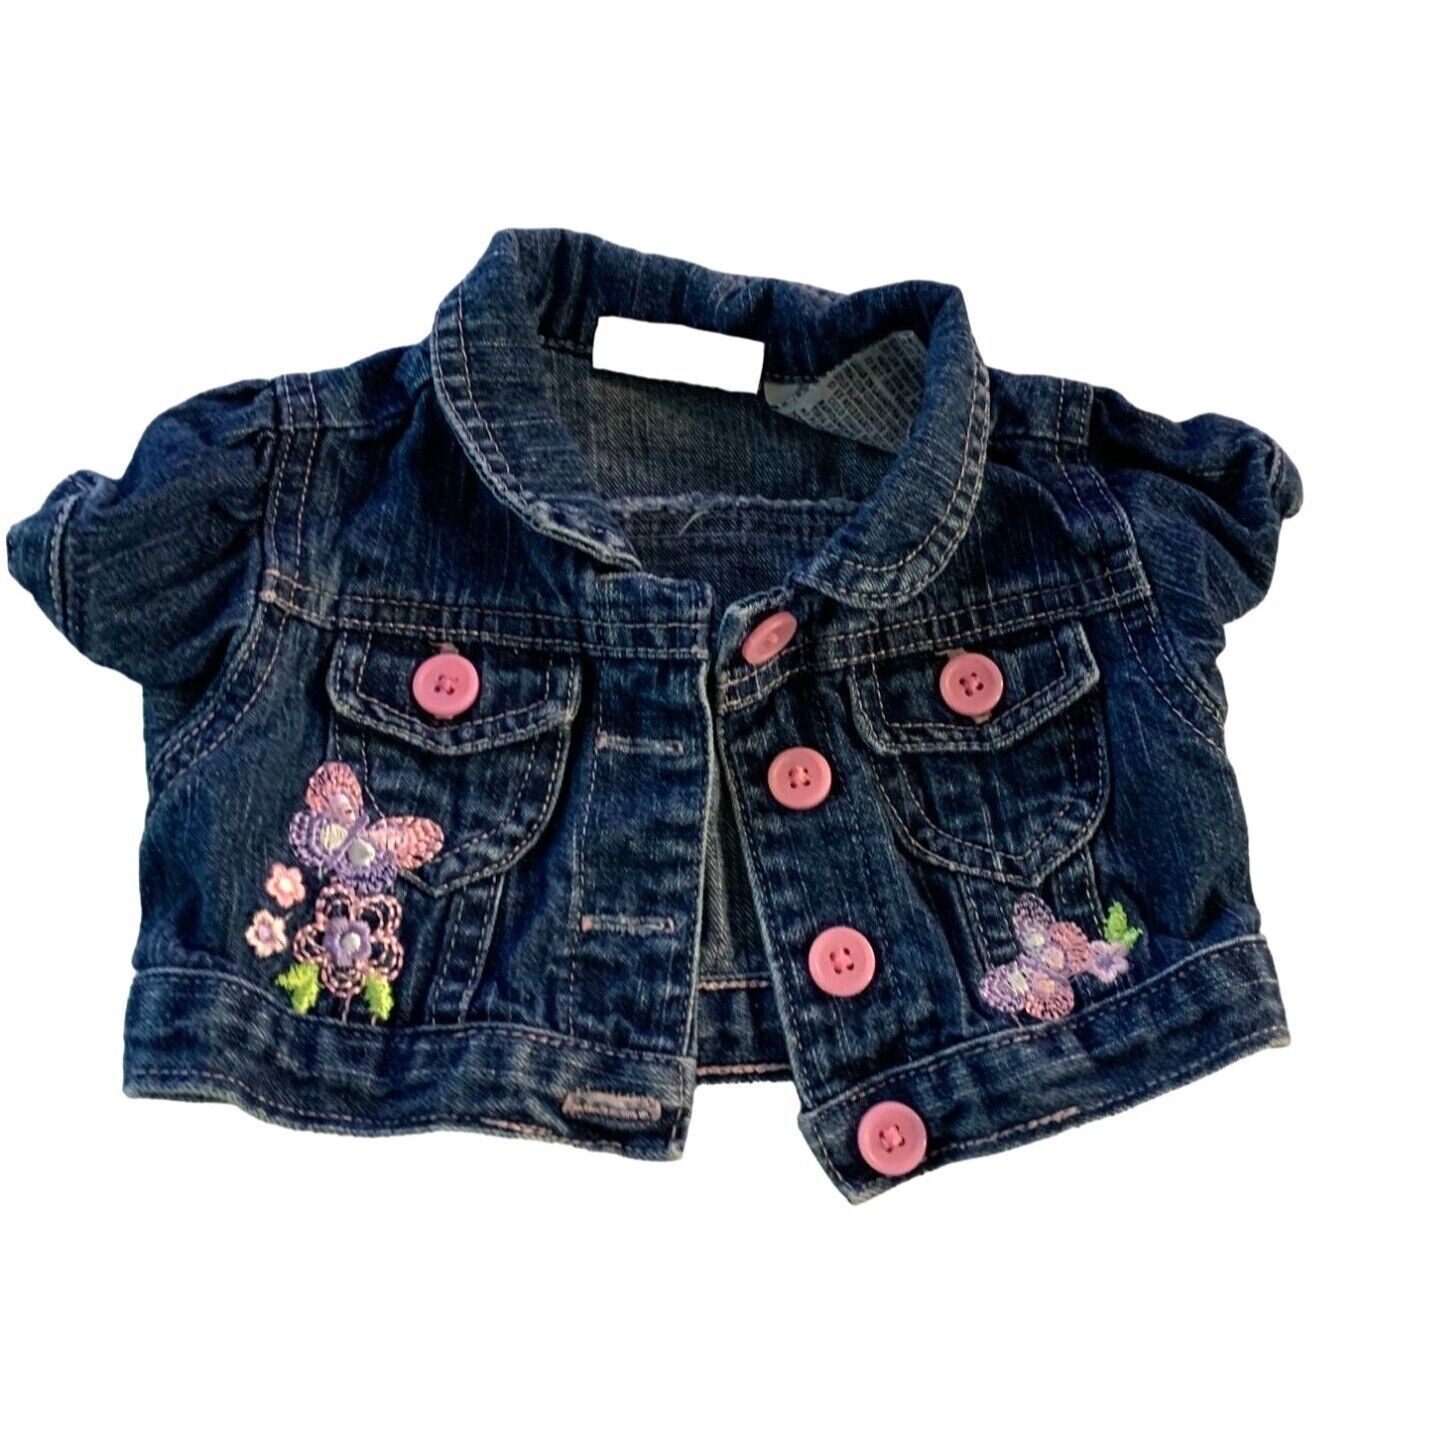 Primary image for Young Hearts Girls Infant Baby Size 6 9 months Cropped Jean Denim Jacket Pink Fl